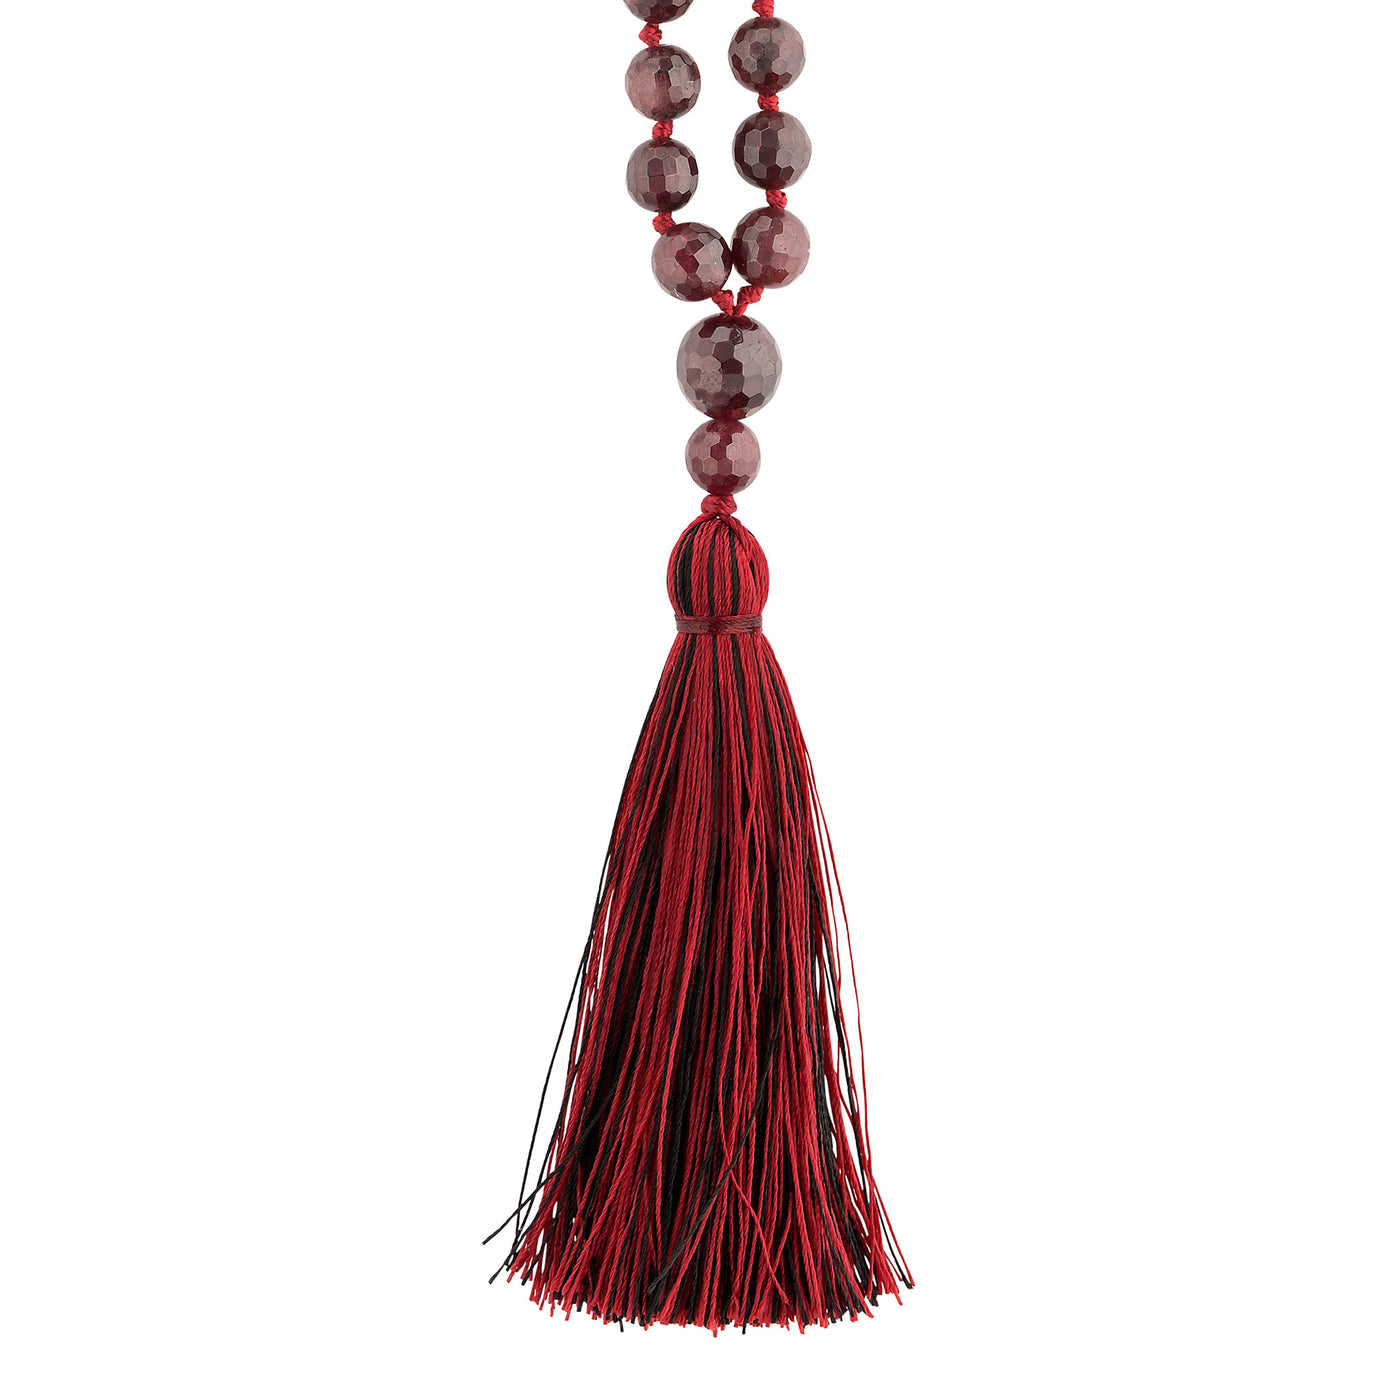 PASSION: Garnet Faceted 108 bead Hand-knotted Mala